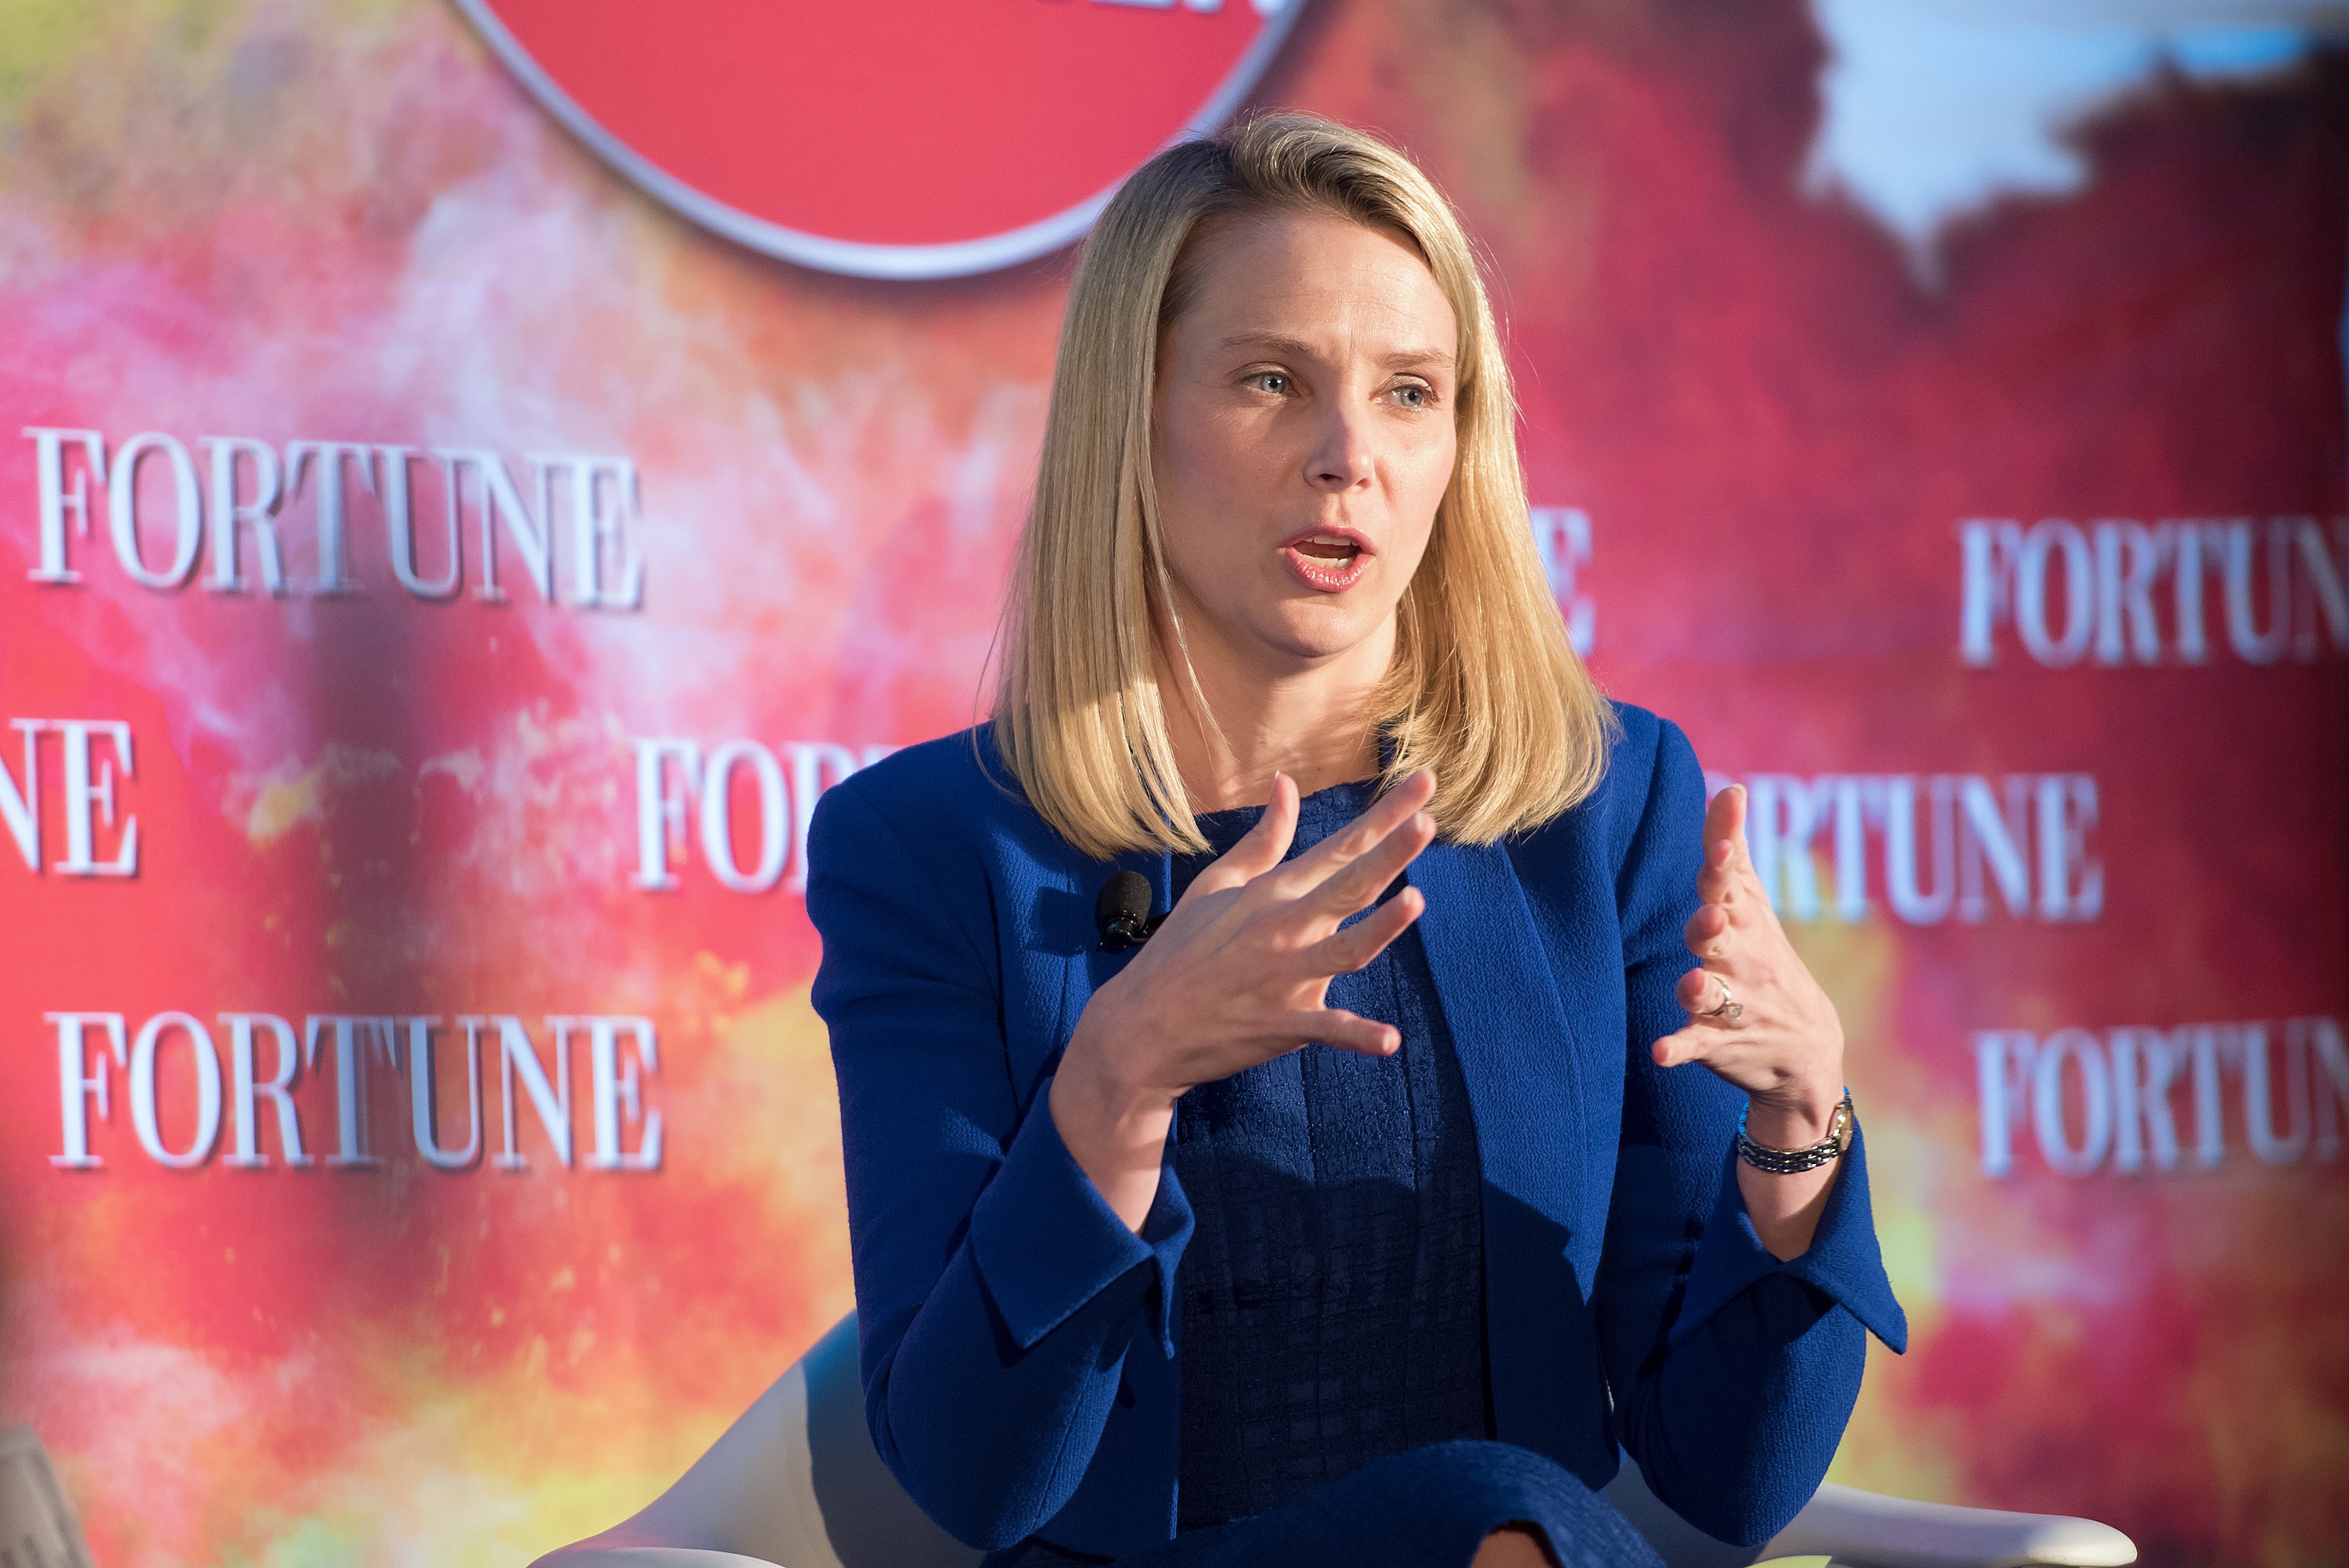 President and CEO of Yahoo Marissa Mayer attends Fortune Magazines 2015 Most Powerful Women Evening With NYC at Time Warner Center in New York City, on May 18, 2015. (Mike Pont—Getty Images)